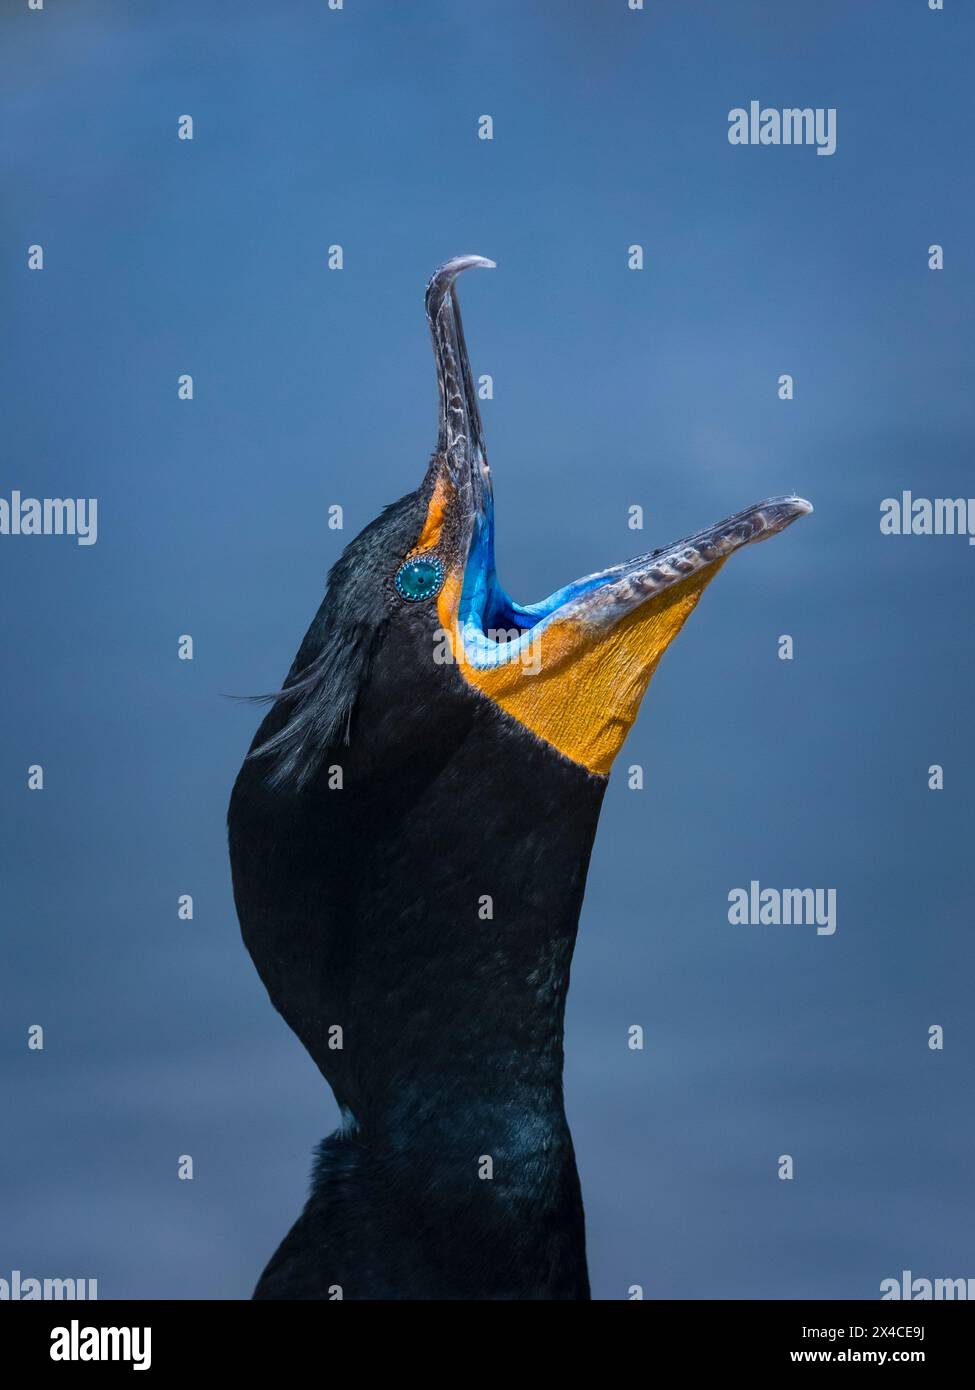 Adult double-crested cormorant with beak open showing brilliant turquois coloring inside, showing tufts, Anhinga Trail, Everglades National Park, Florida, USA Stock Photo